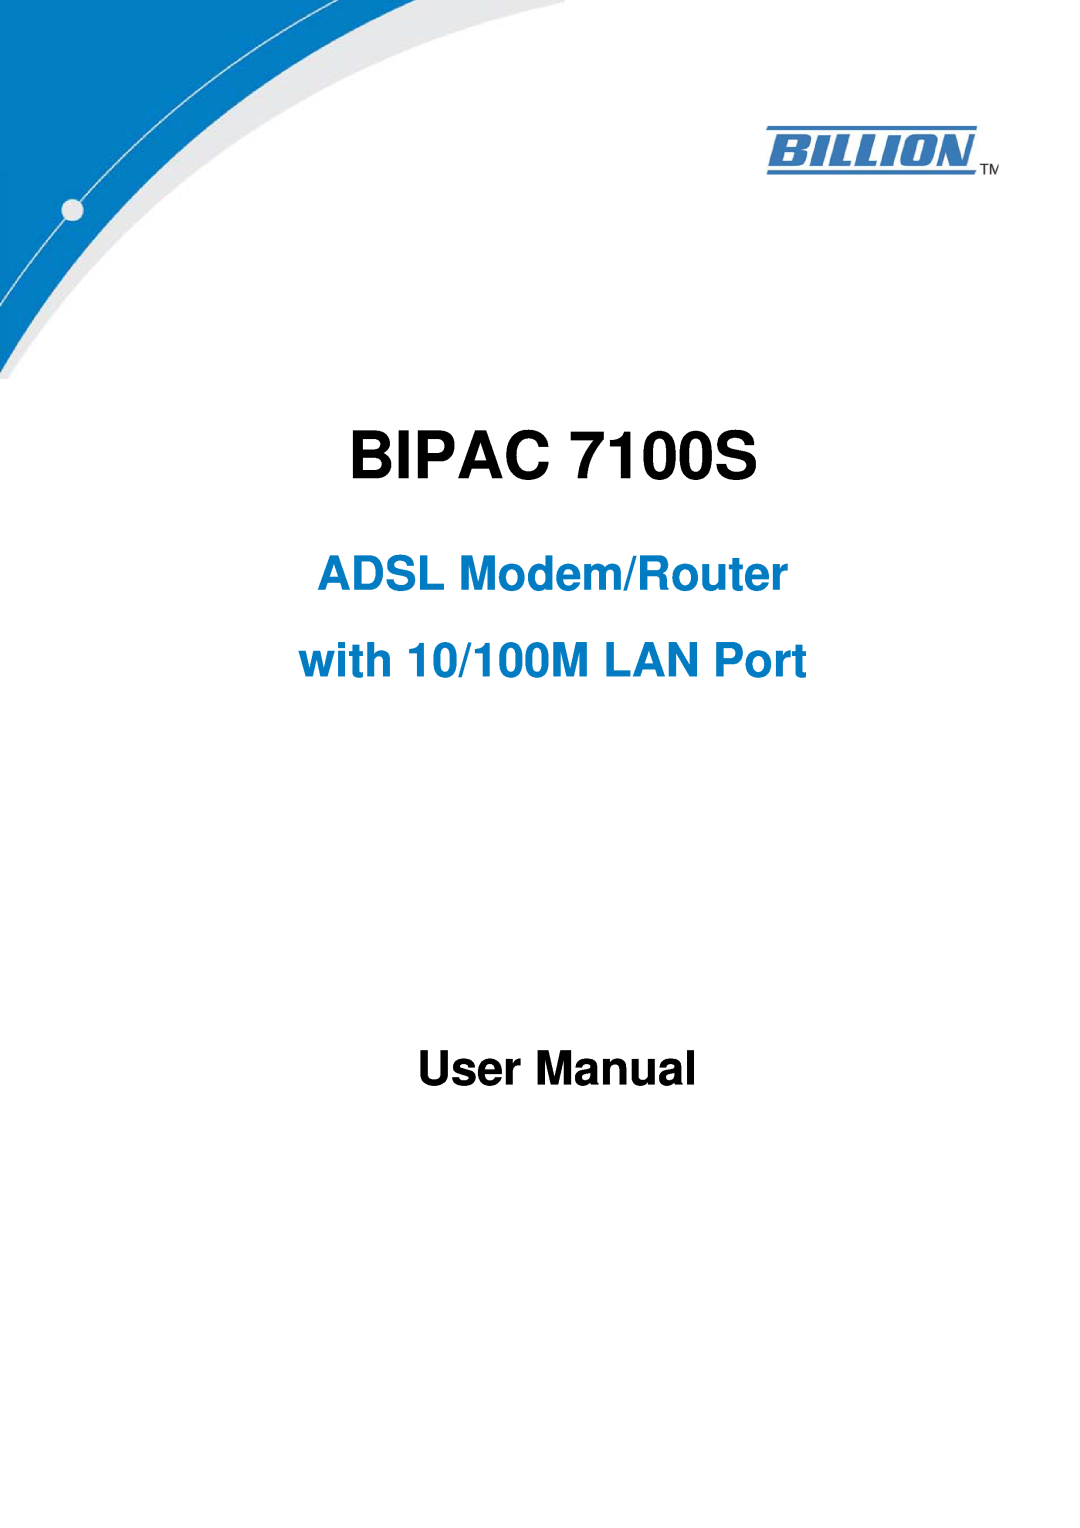 Billion Electric Company user manual BIPAC 7100S, ADSL Modem/Router with 10/100M LAN Port, User Manual 